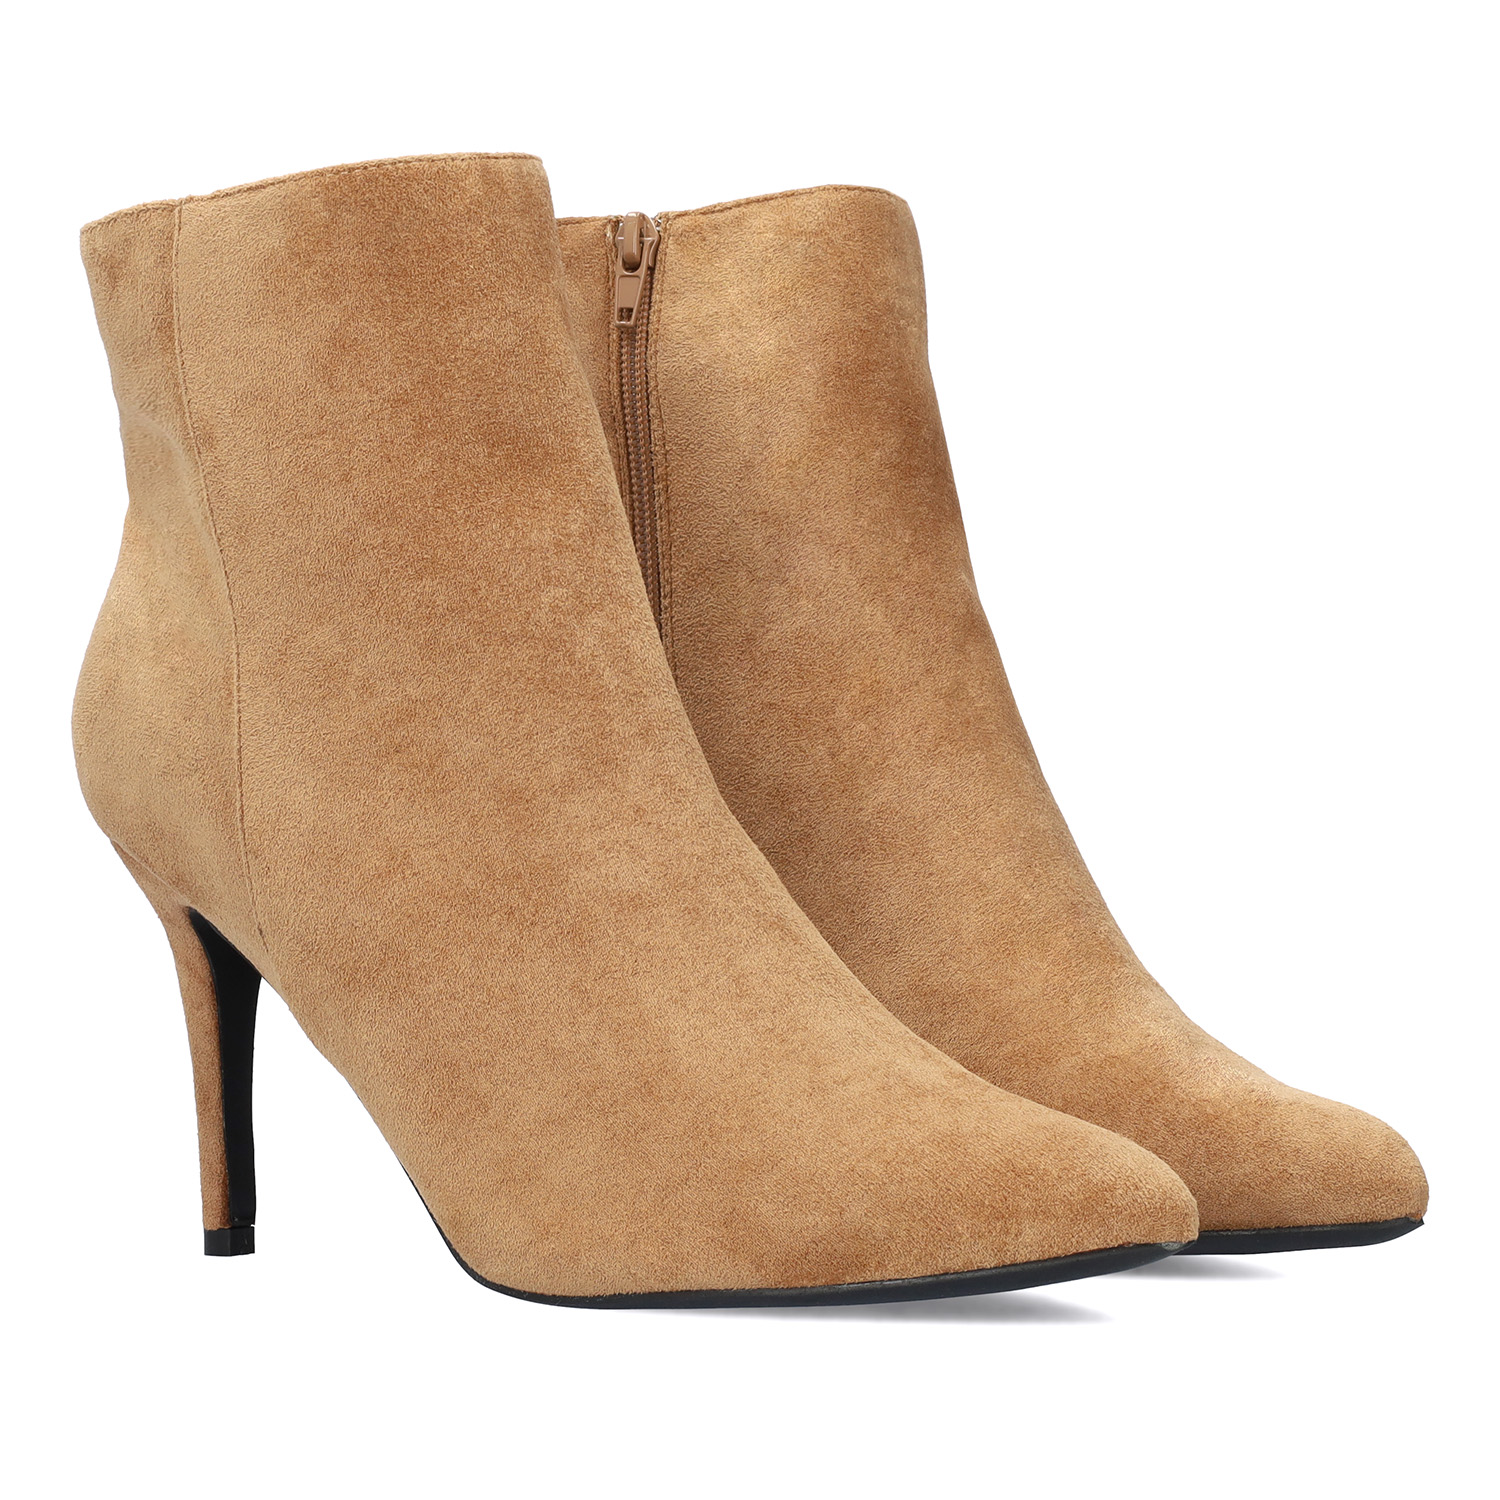 High-heeled booties in brown faux suede